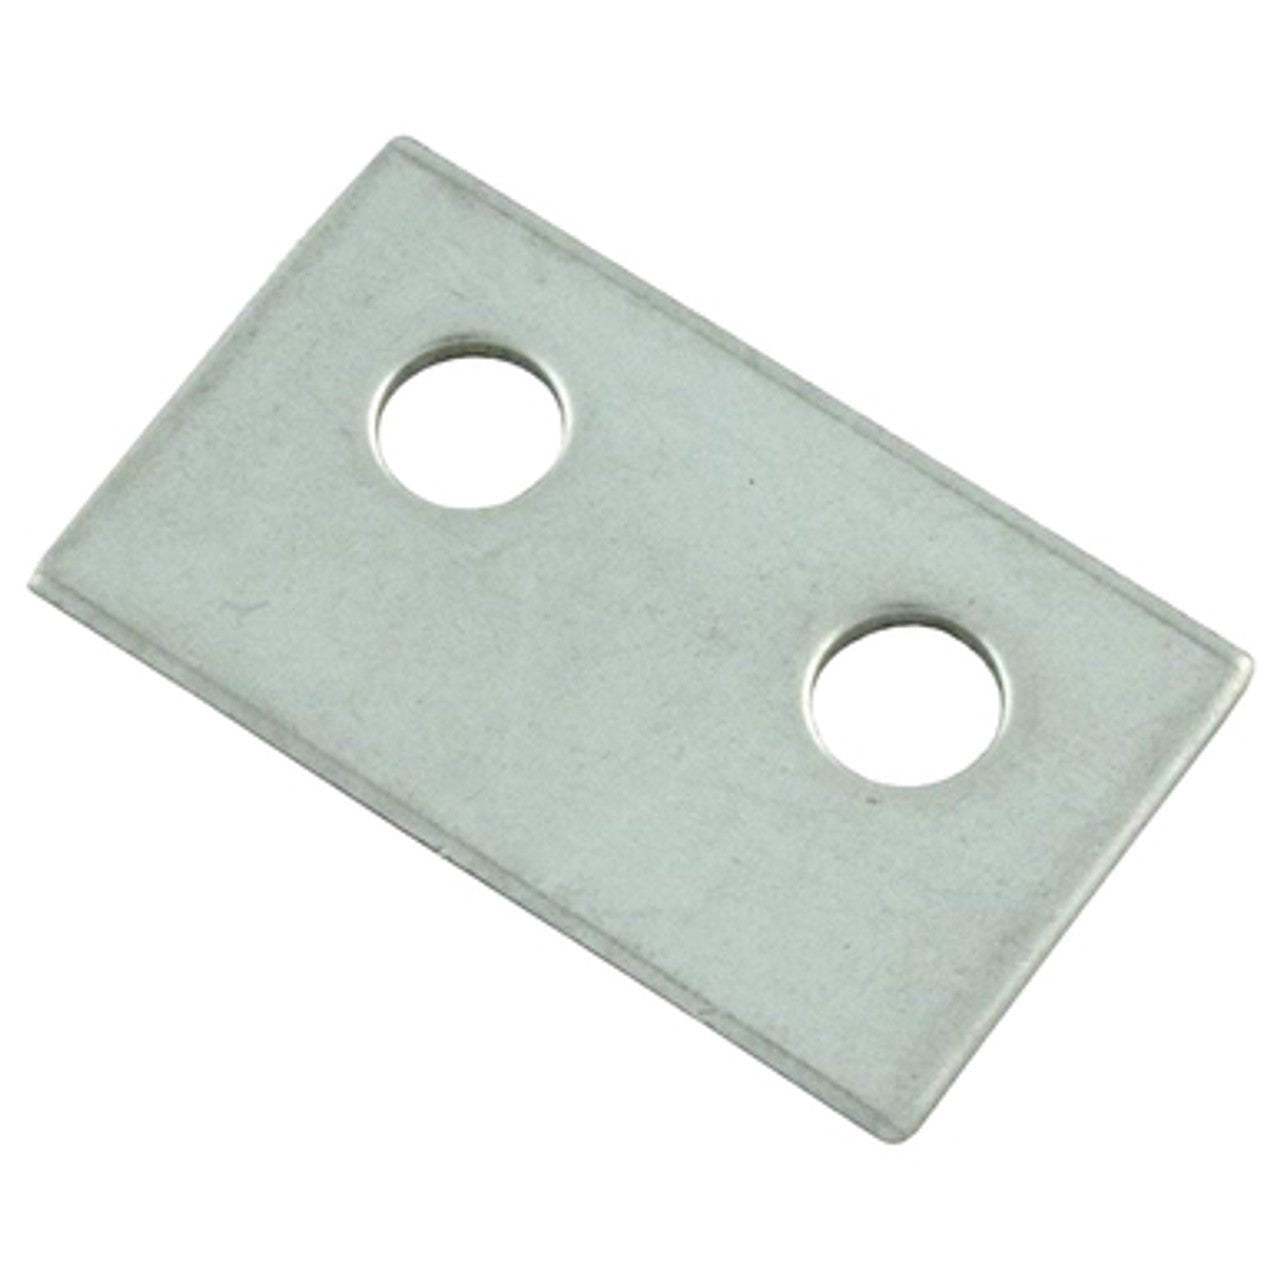 Pentair Axle Plate Replacement LC70/LLC70 EC70 - Cleaner Parts - img-1